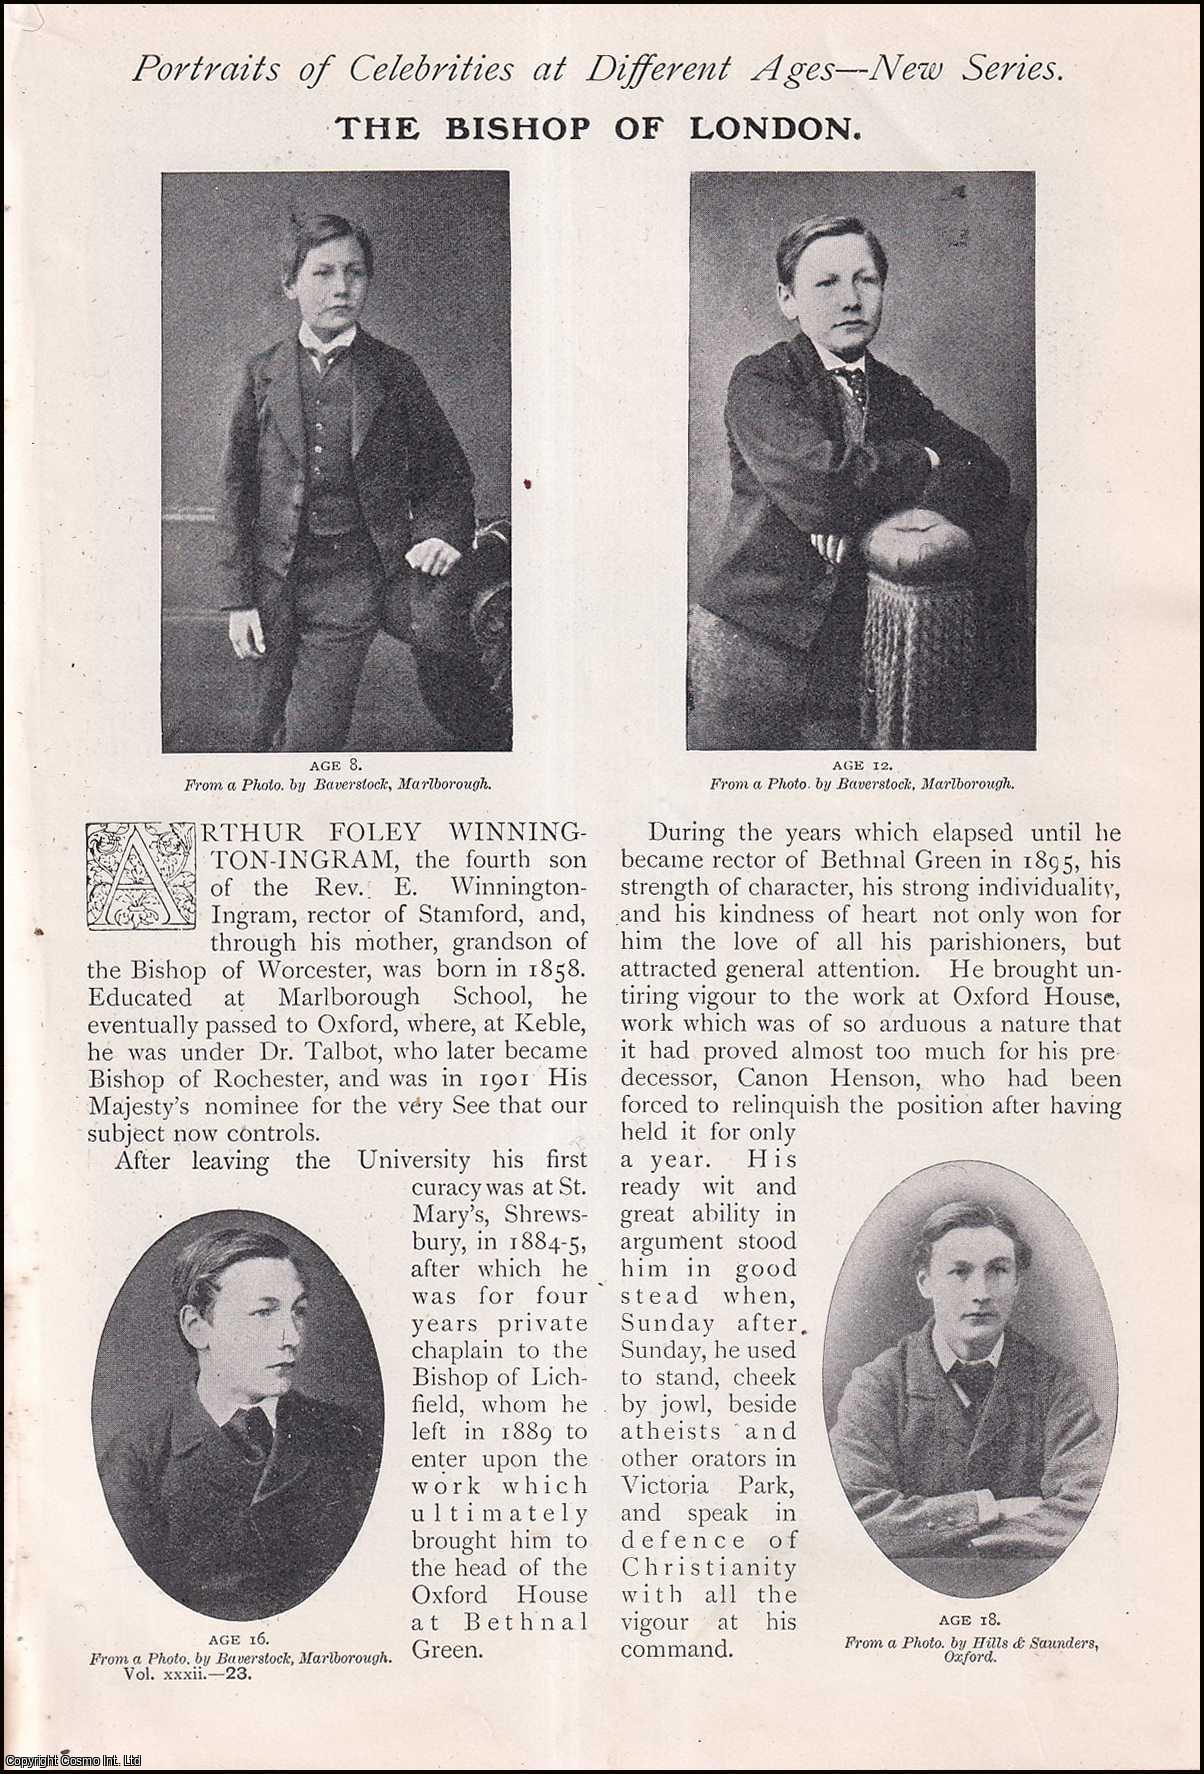 No Author Stated - The Bishop of London, Arthur Foley Winnington-Ingram. Portraits of Celebrities at Different Ages. An uncommon original article from The Strand Magazine, 1906.